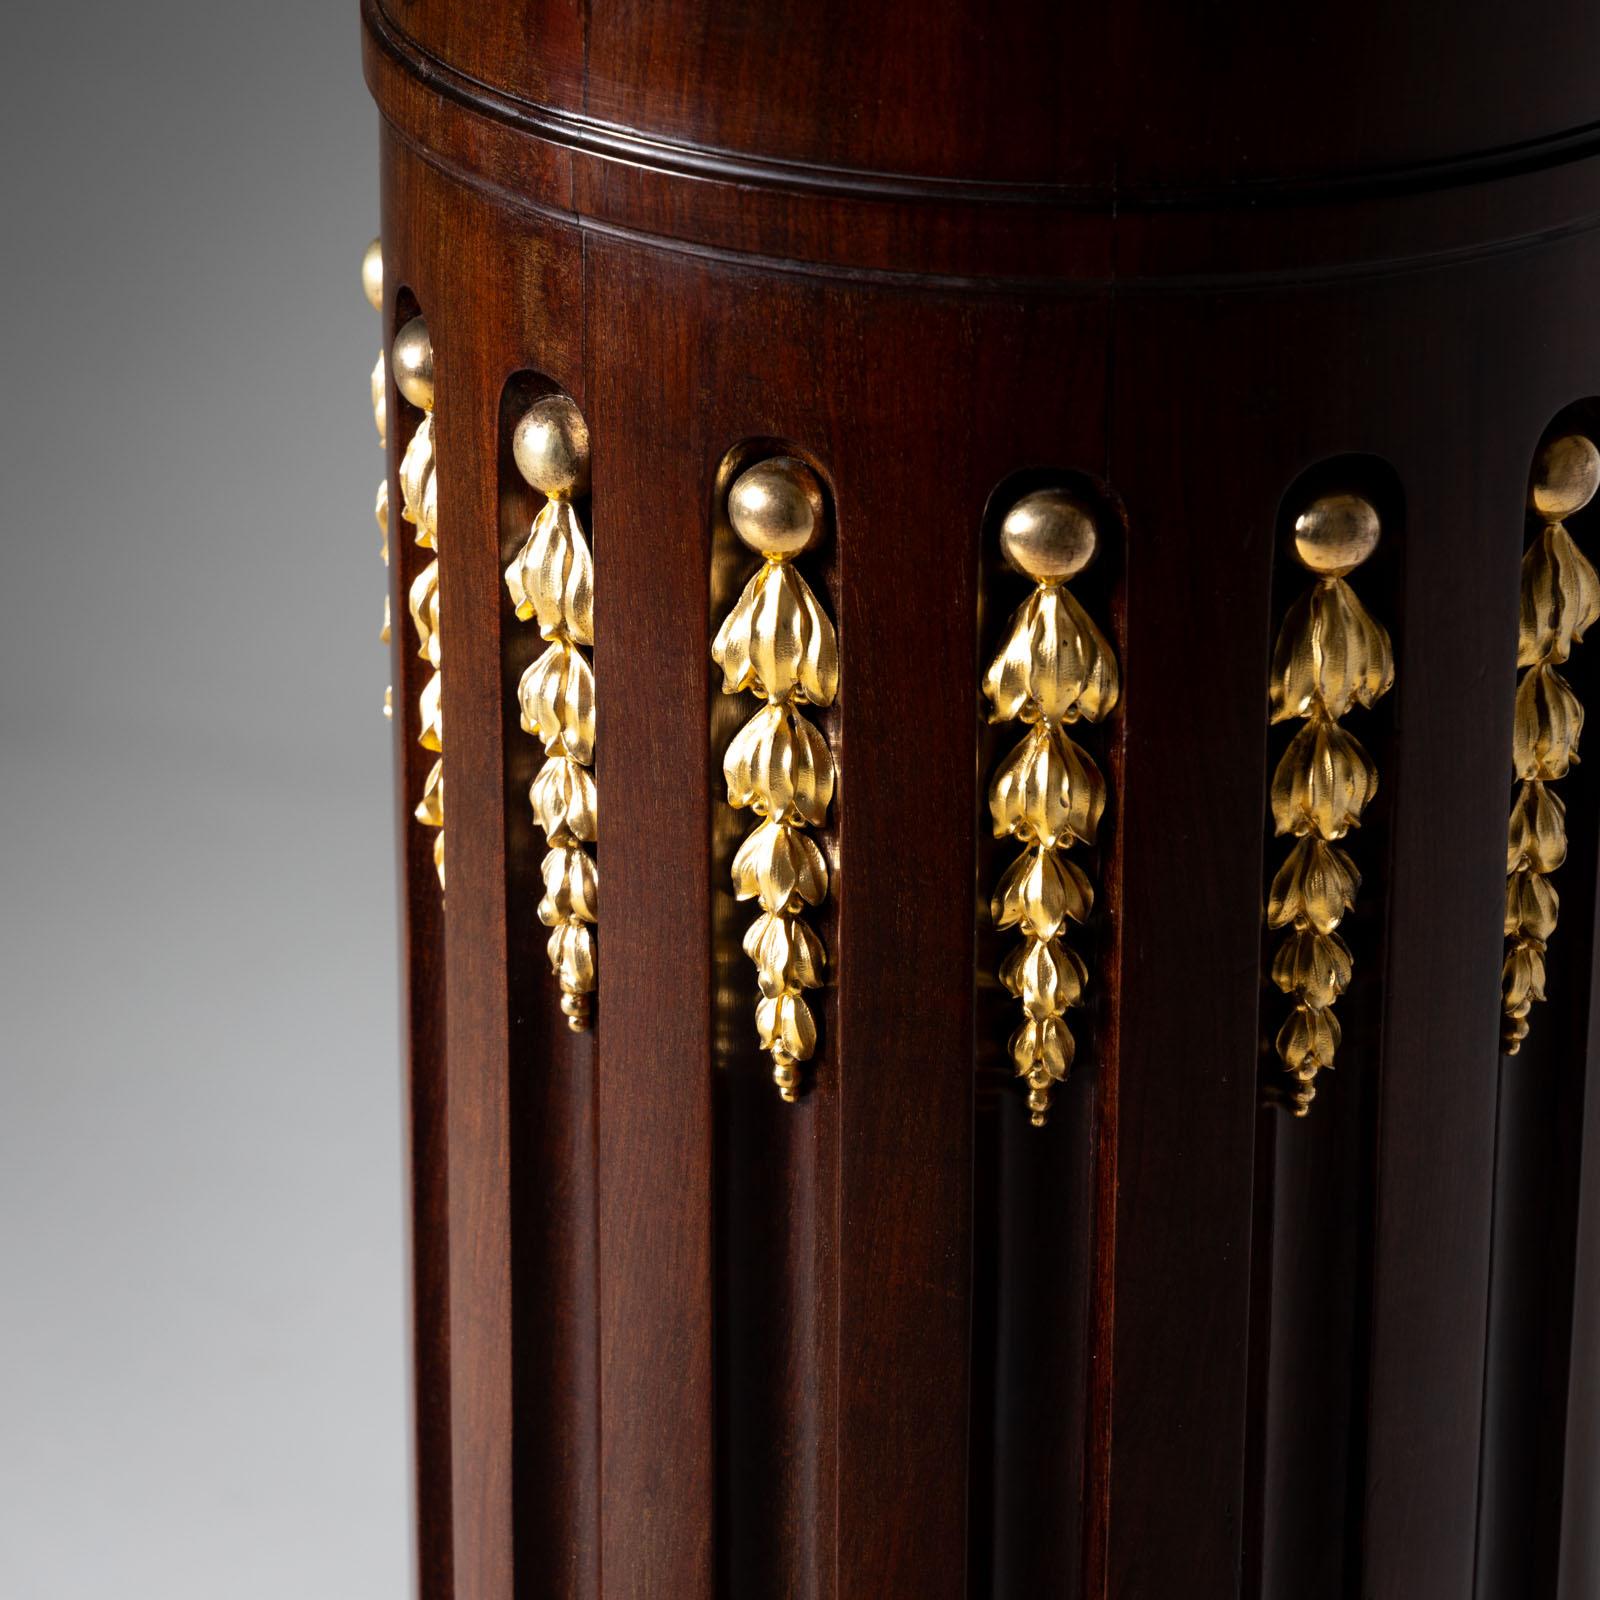 Fluted column in mahogany veneer, with a white marble top and fire-gilt appliqués in the fluting. The chest of drawers stands on a round, multi-profiled base over gilded paw feet. The diameter of the shelf is Ø33 cm. 